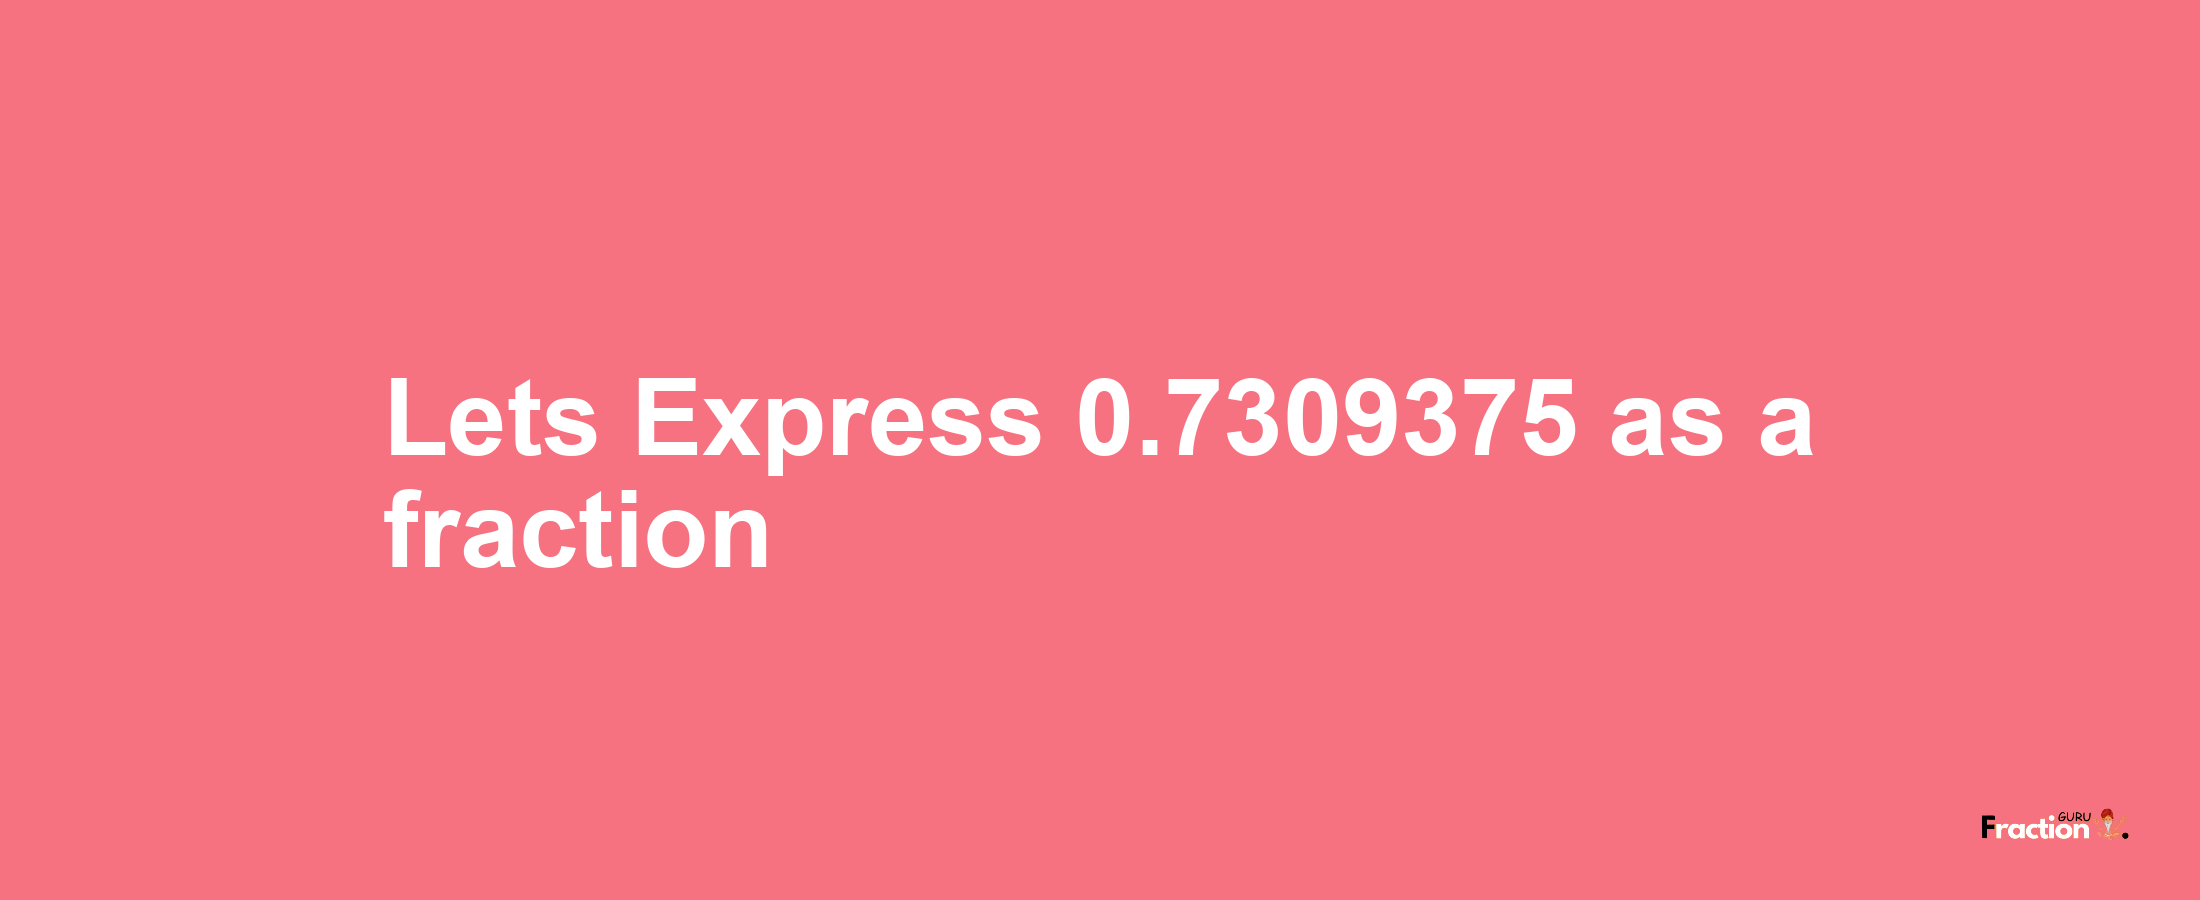 Lets Express 0.7309375 as afraction